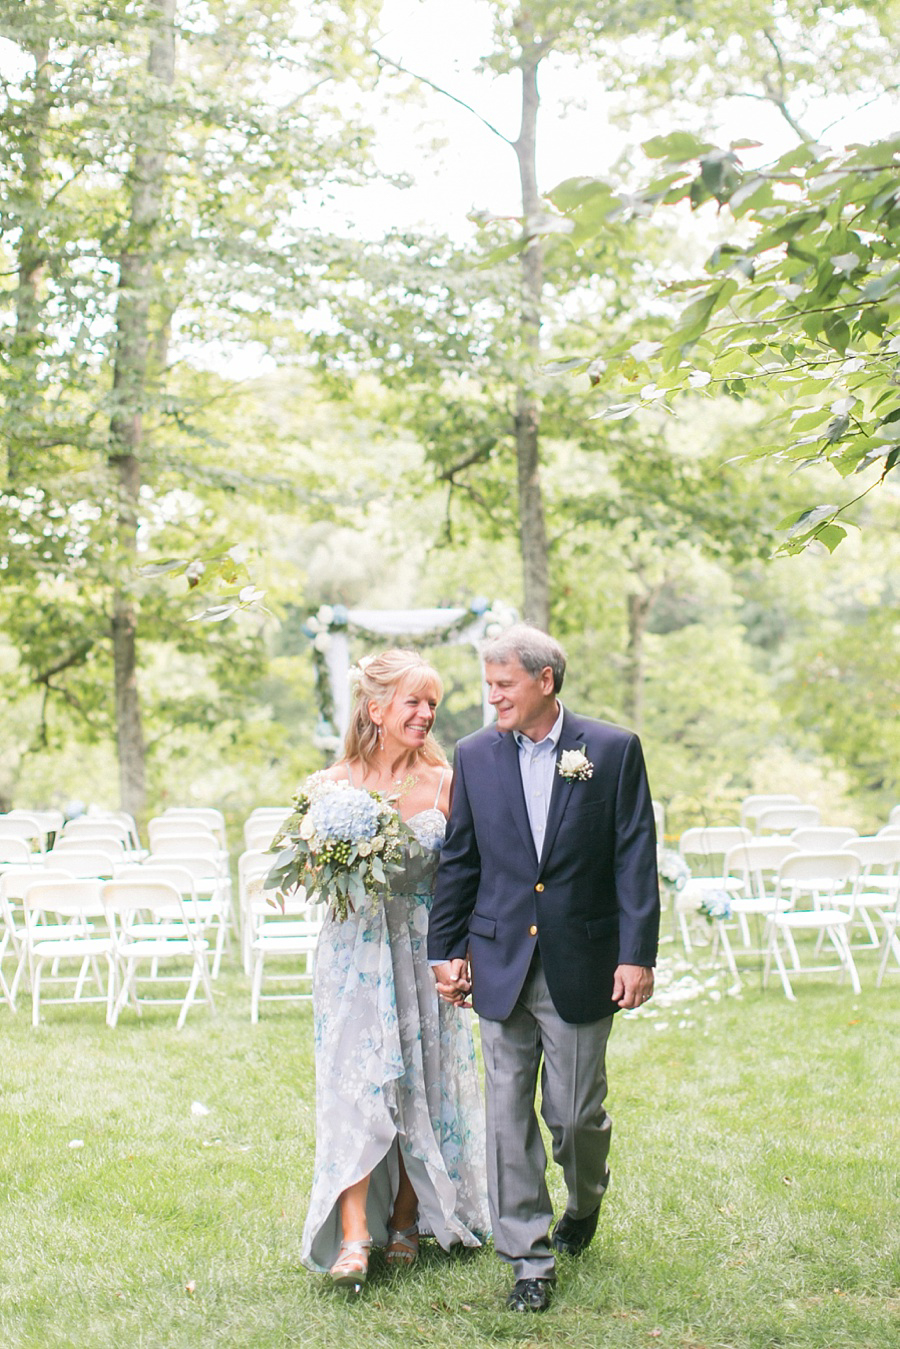 Private Estate Wedding Photographer- Amy Rizzuto Photography-29